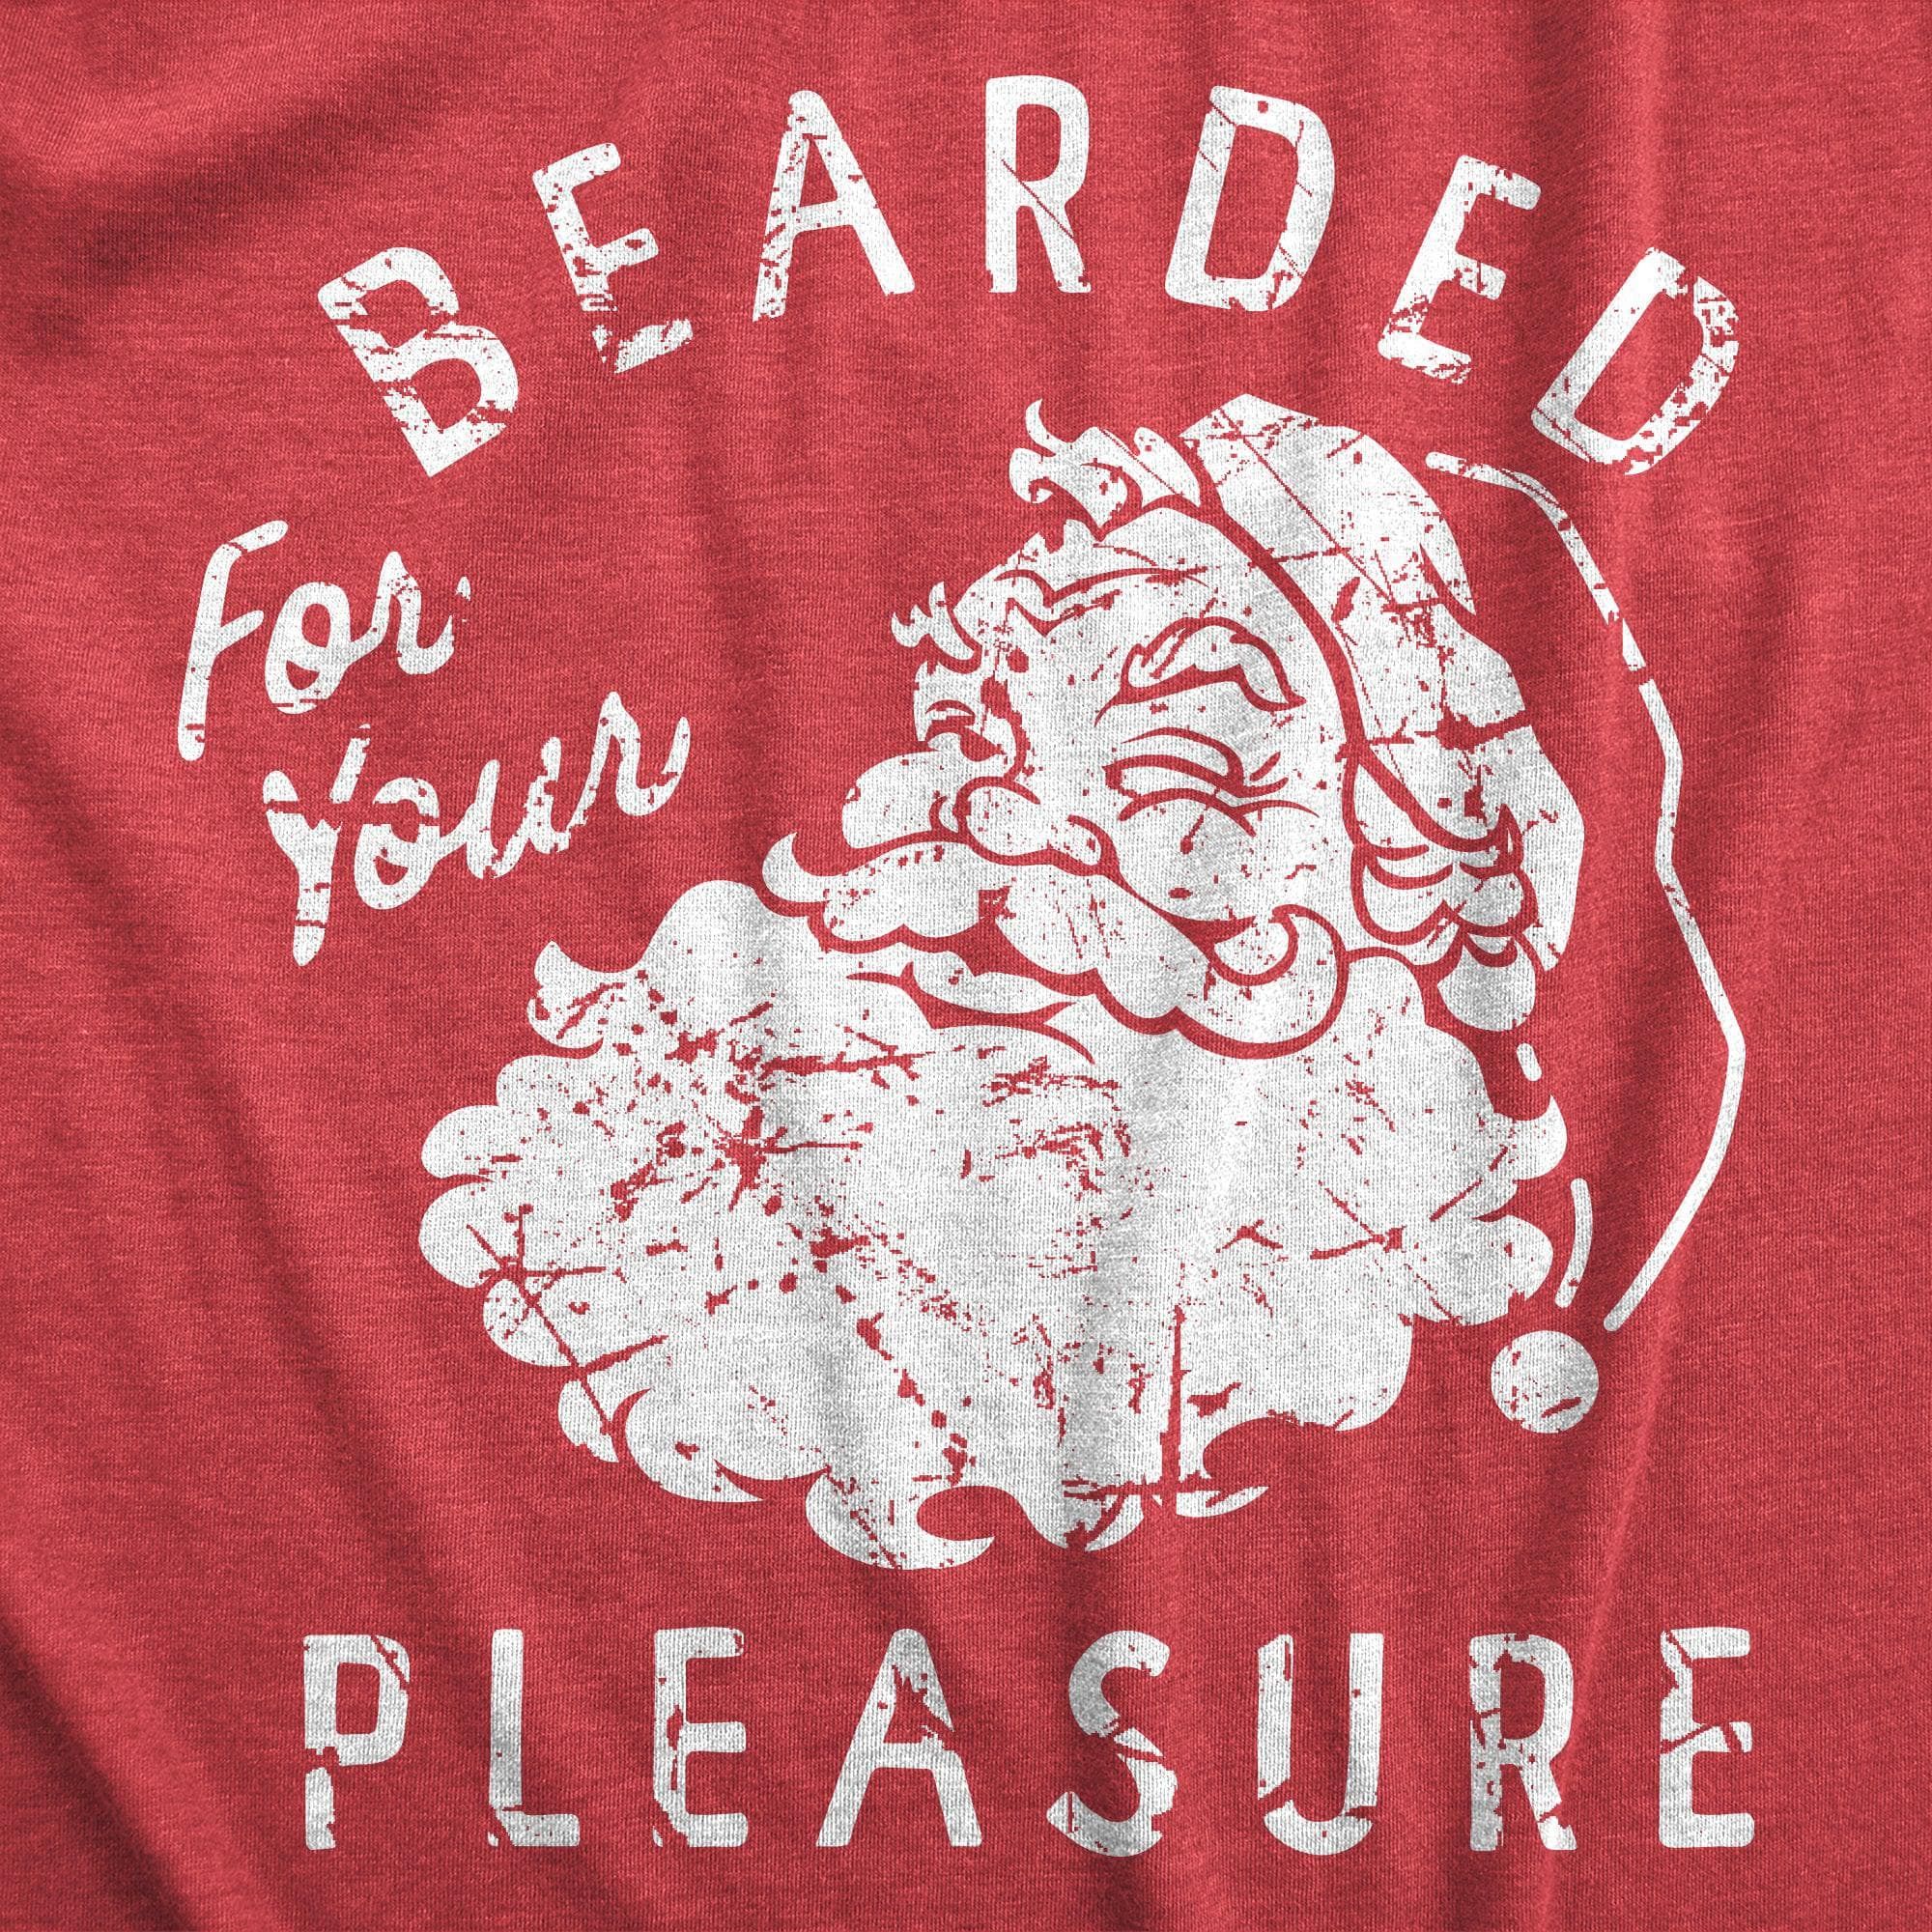 Bearded For Your Pleasure Men's Tshirt  -  Crazy Dog T-Shirts